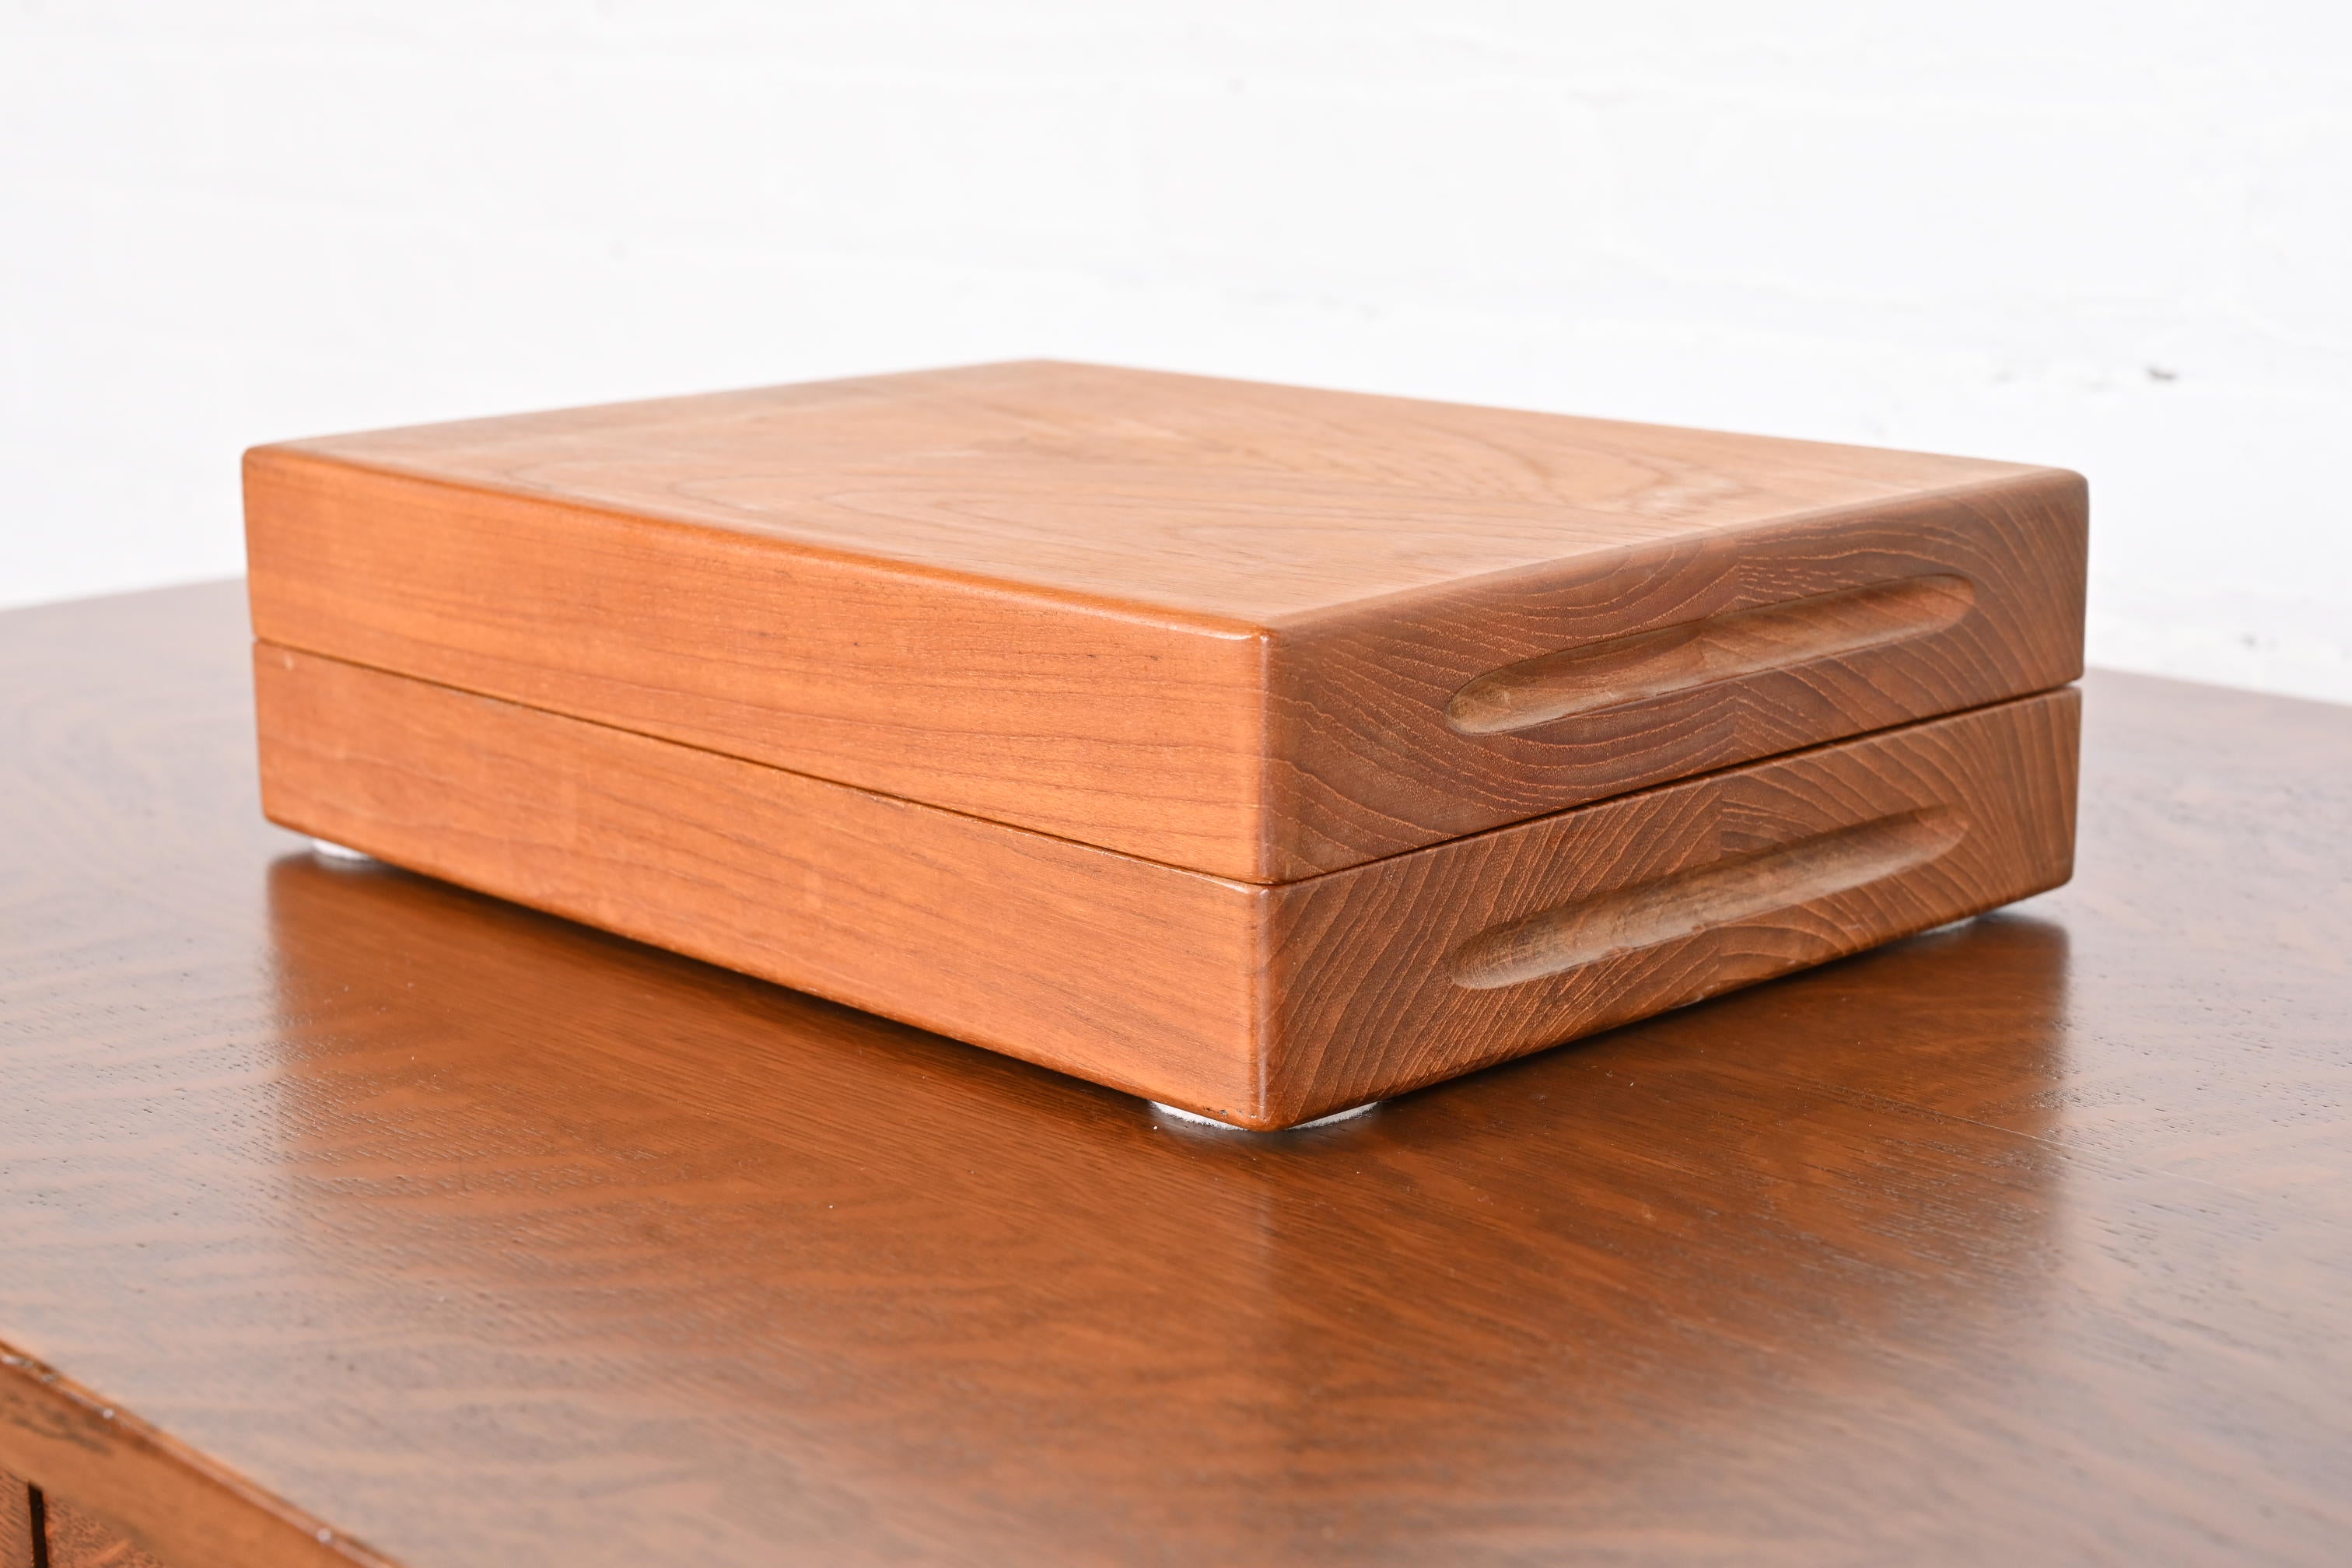 Dyrlund Danish Modern Teak Desk Accessory or Jewelry Box In Good Condition For Sale In South Bend, IN